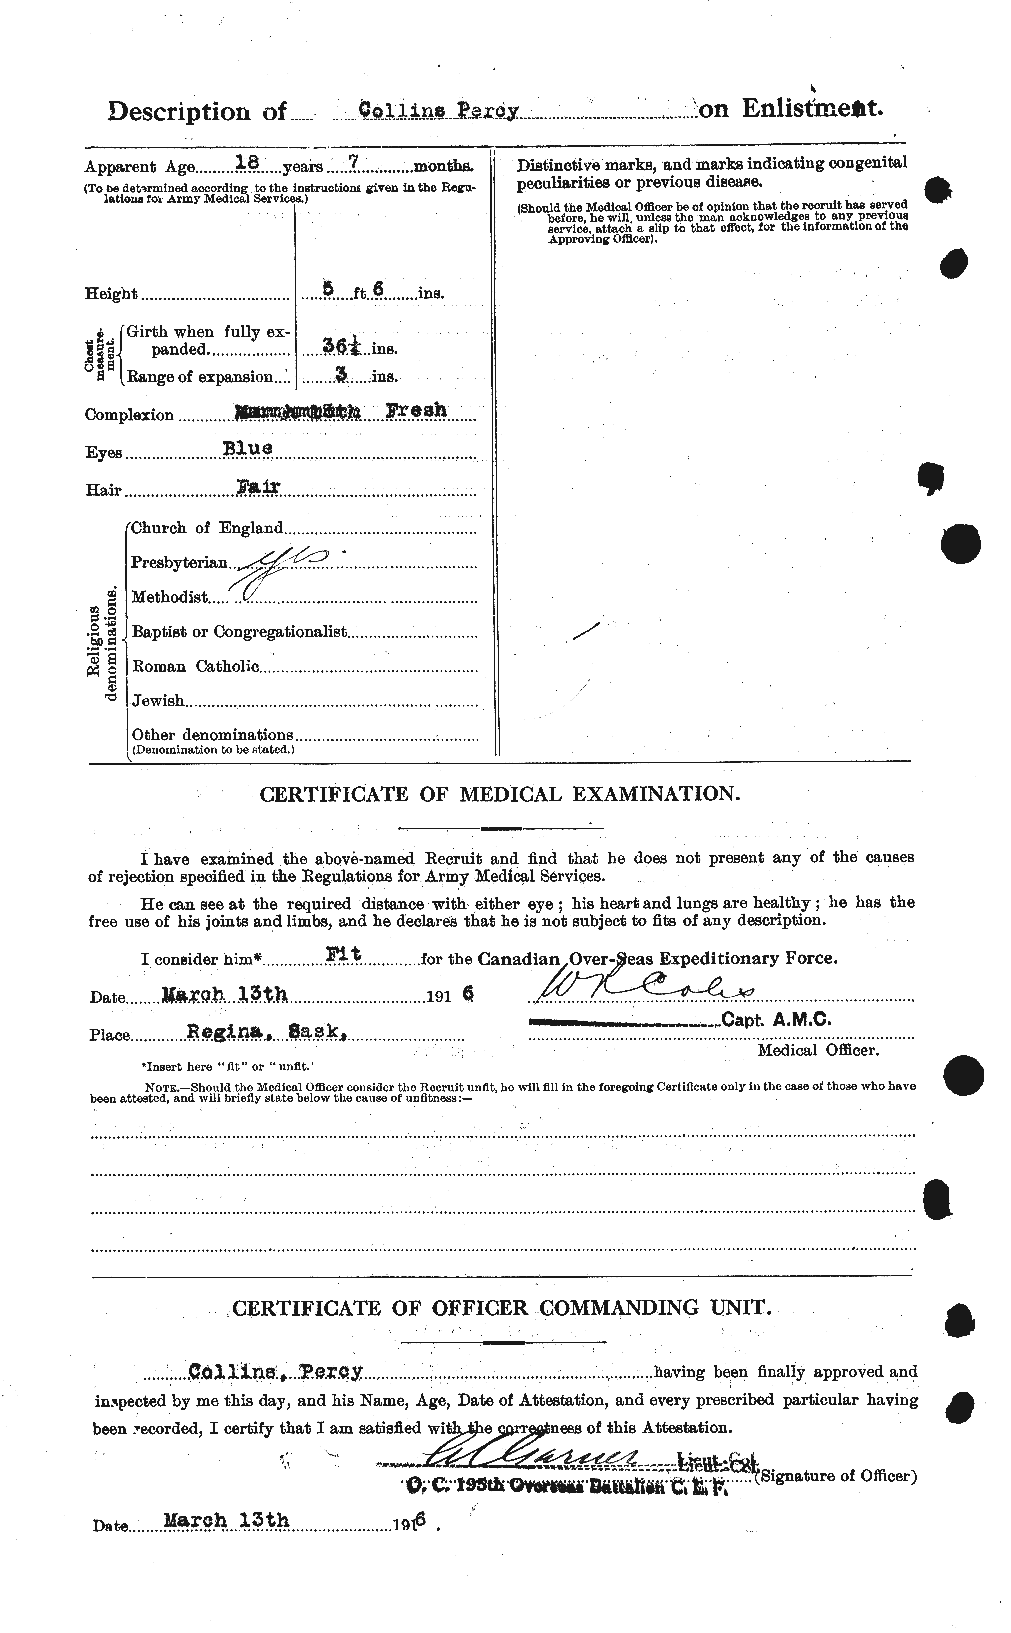 Personnel Records of the First World War - CEF 069298b